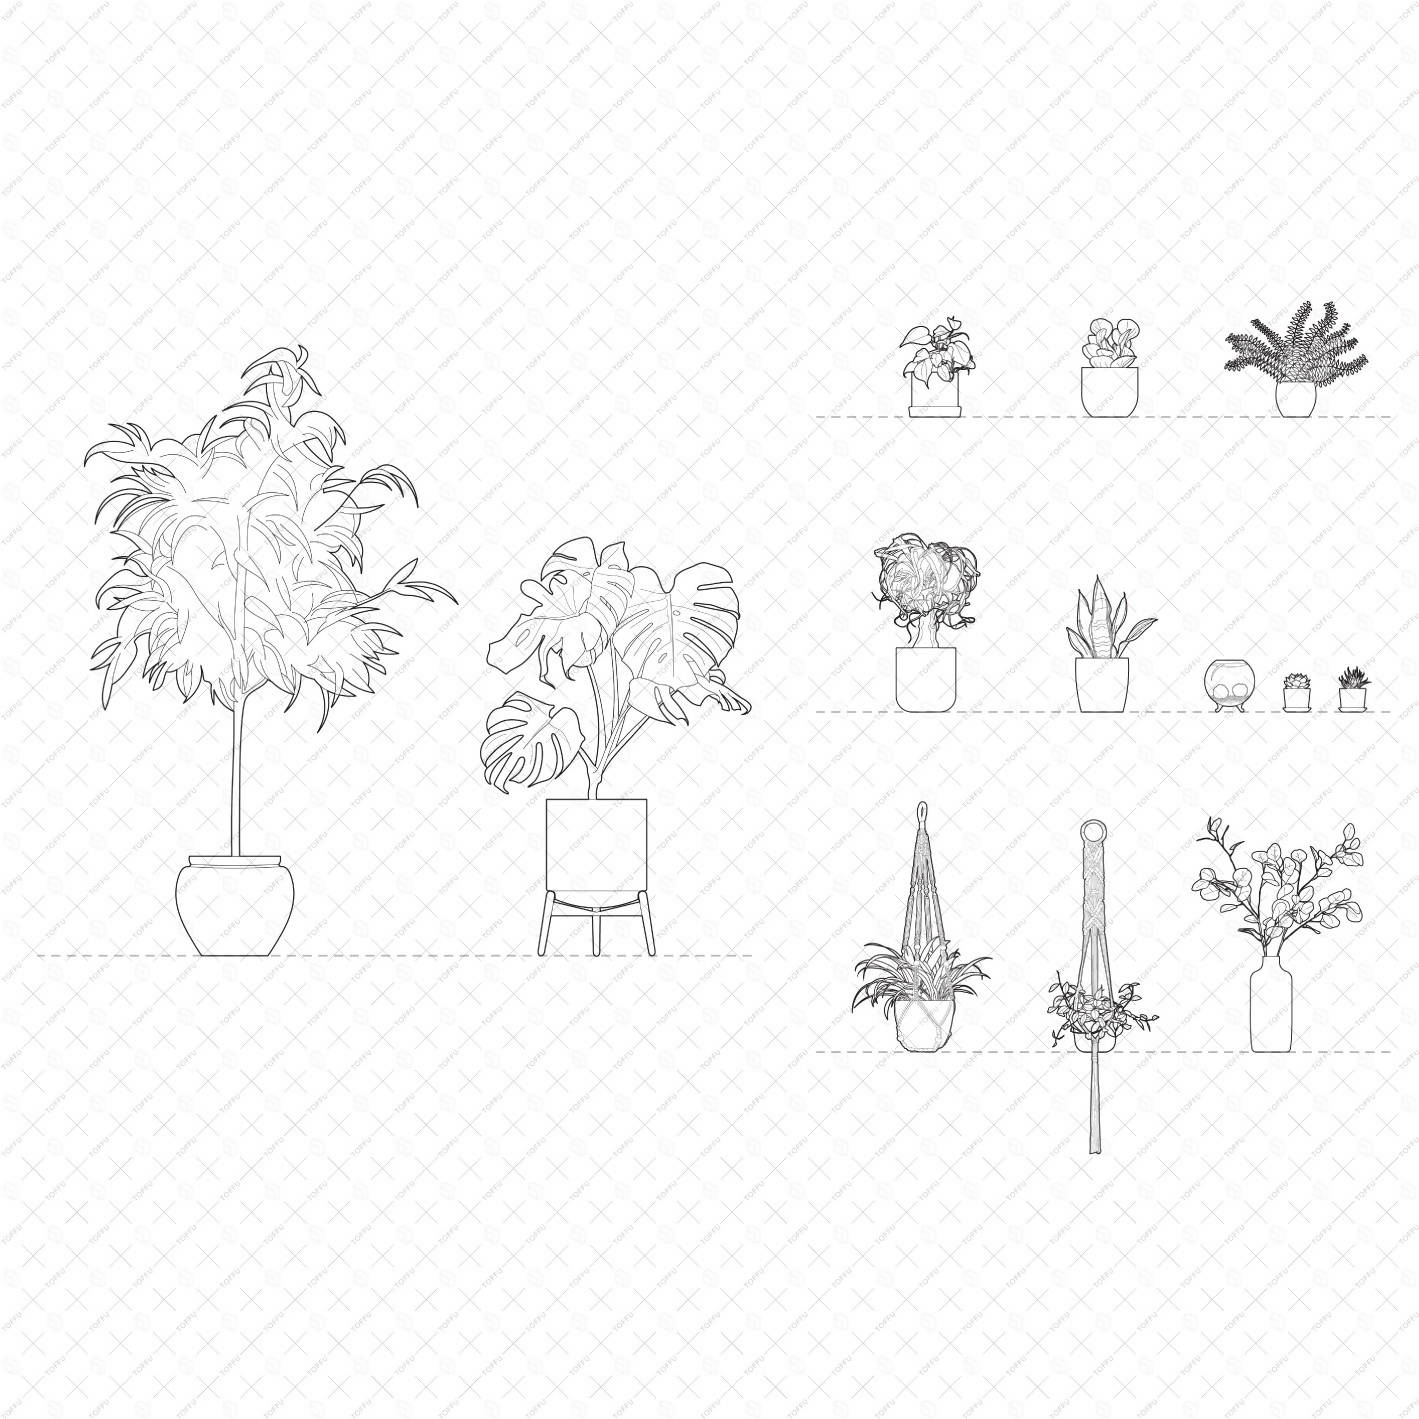 Cad Interior Potted Plants DWG | Toffu Co